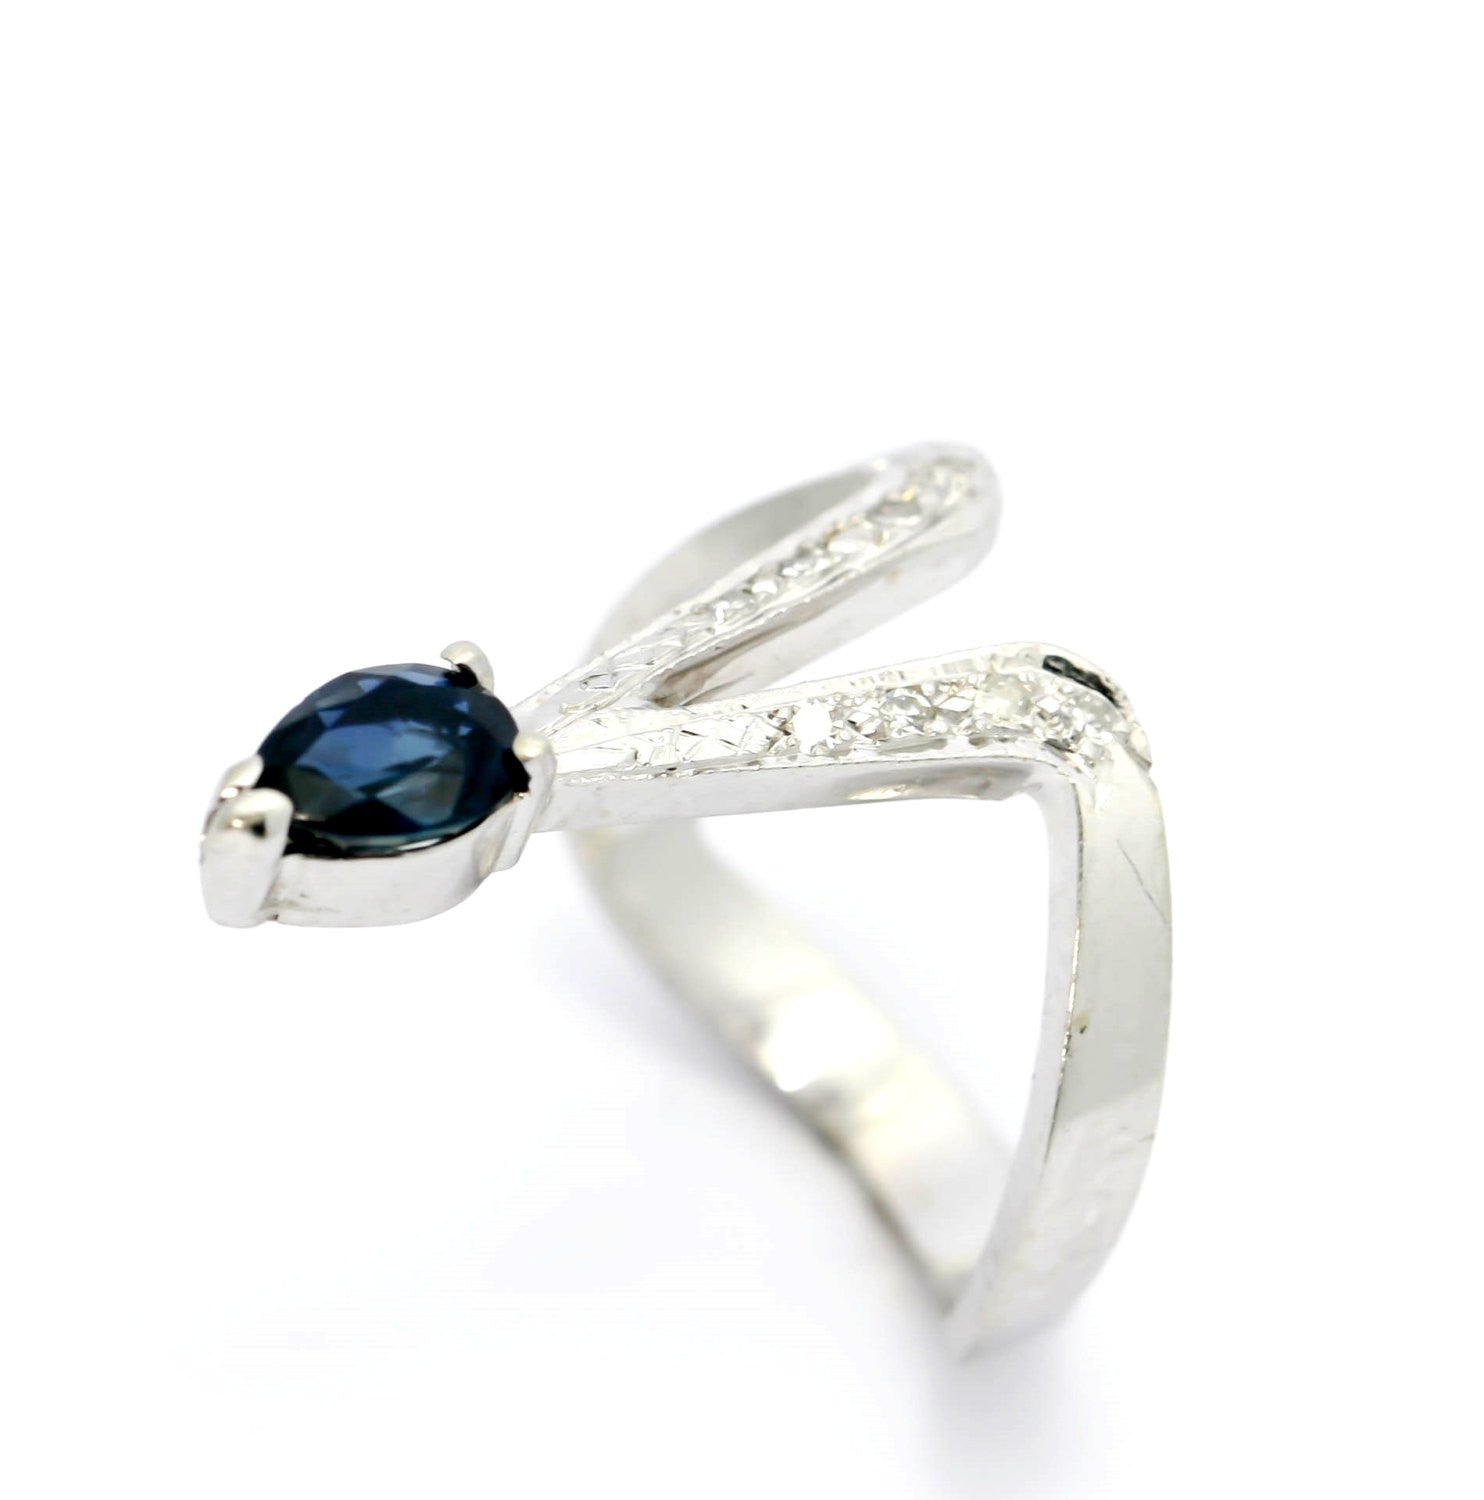 Unique! Blue Sapphire & Diamond Ring, Gothic Style, Goth Gemstone Ring, Cocktail Ring.